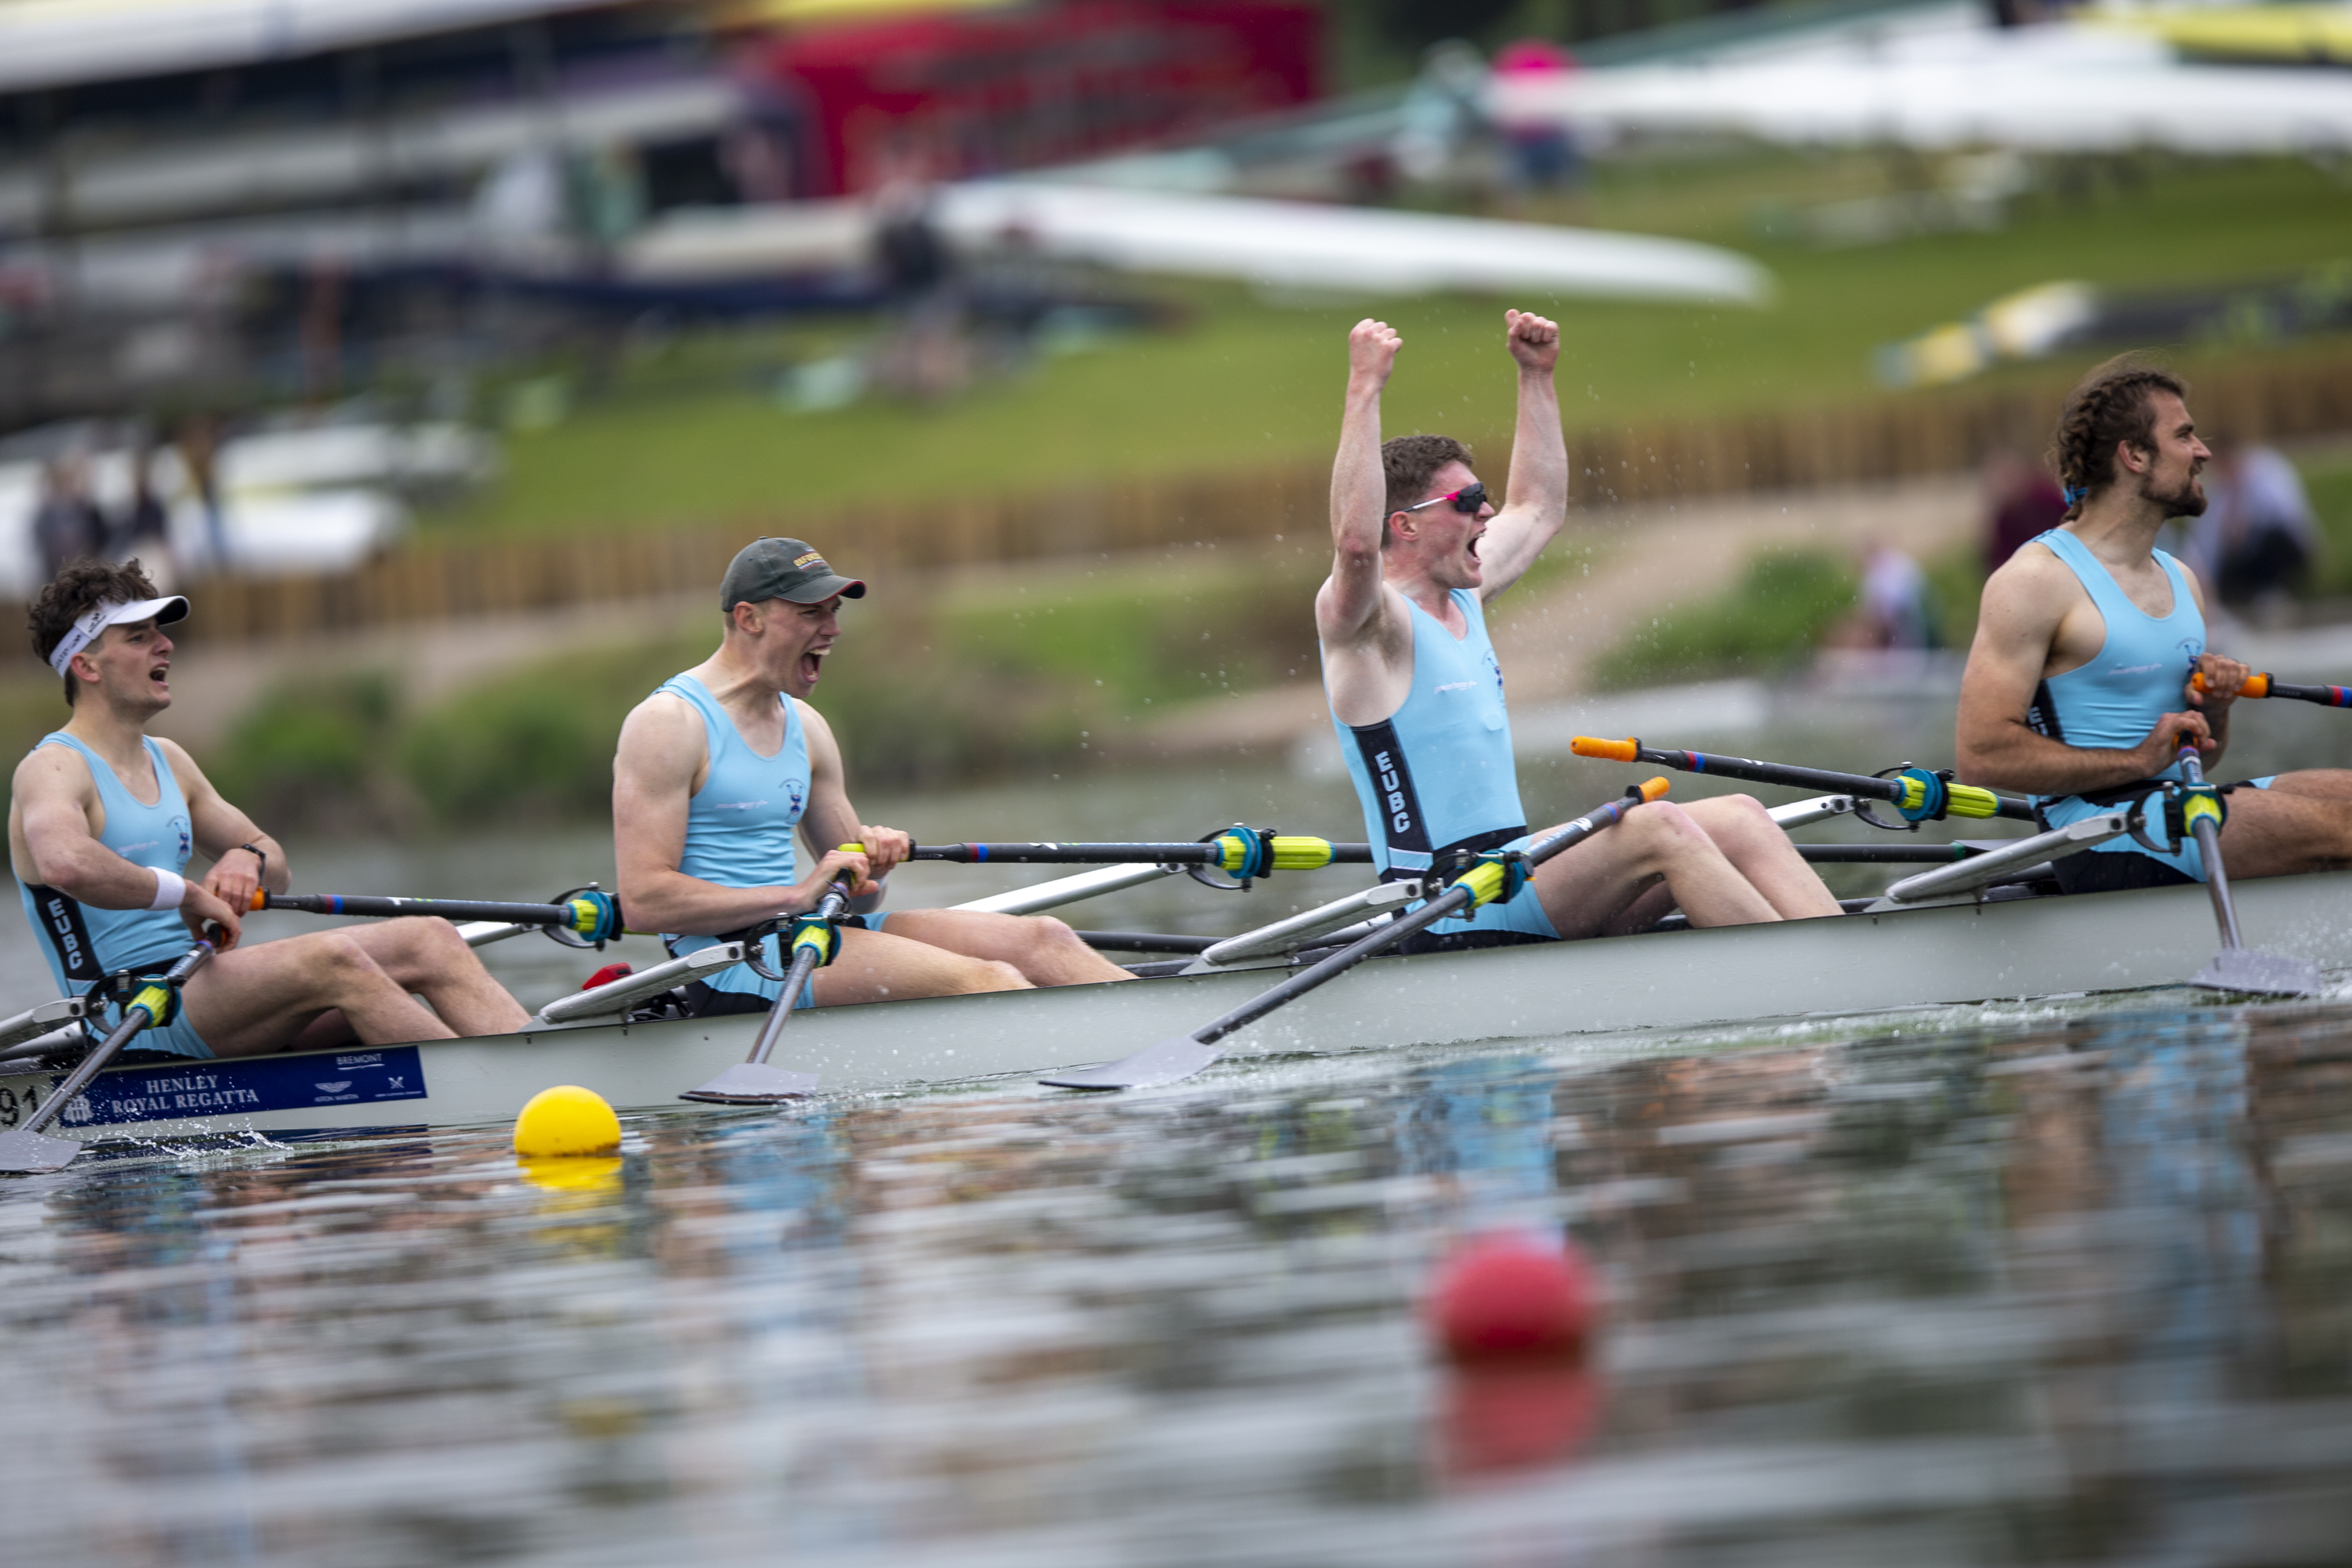 Rowers celebrating on the water